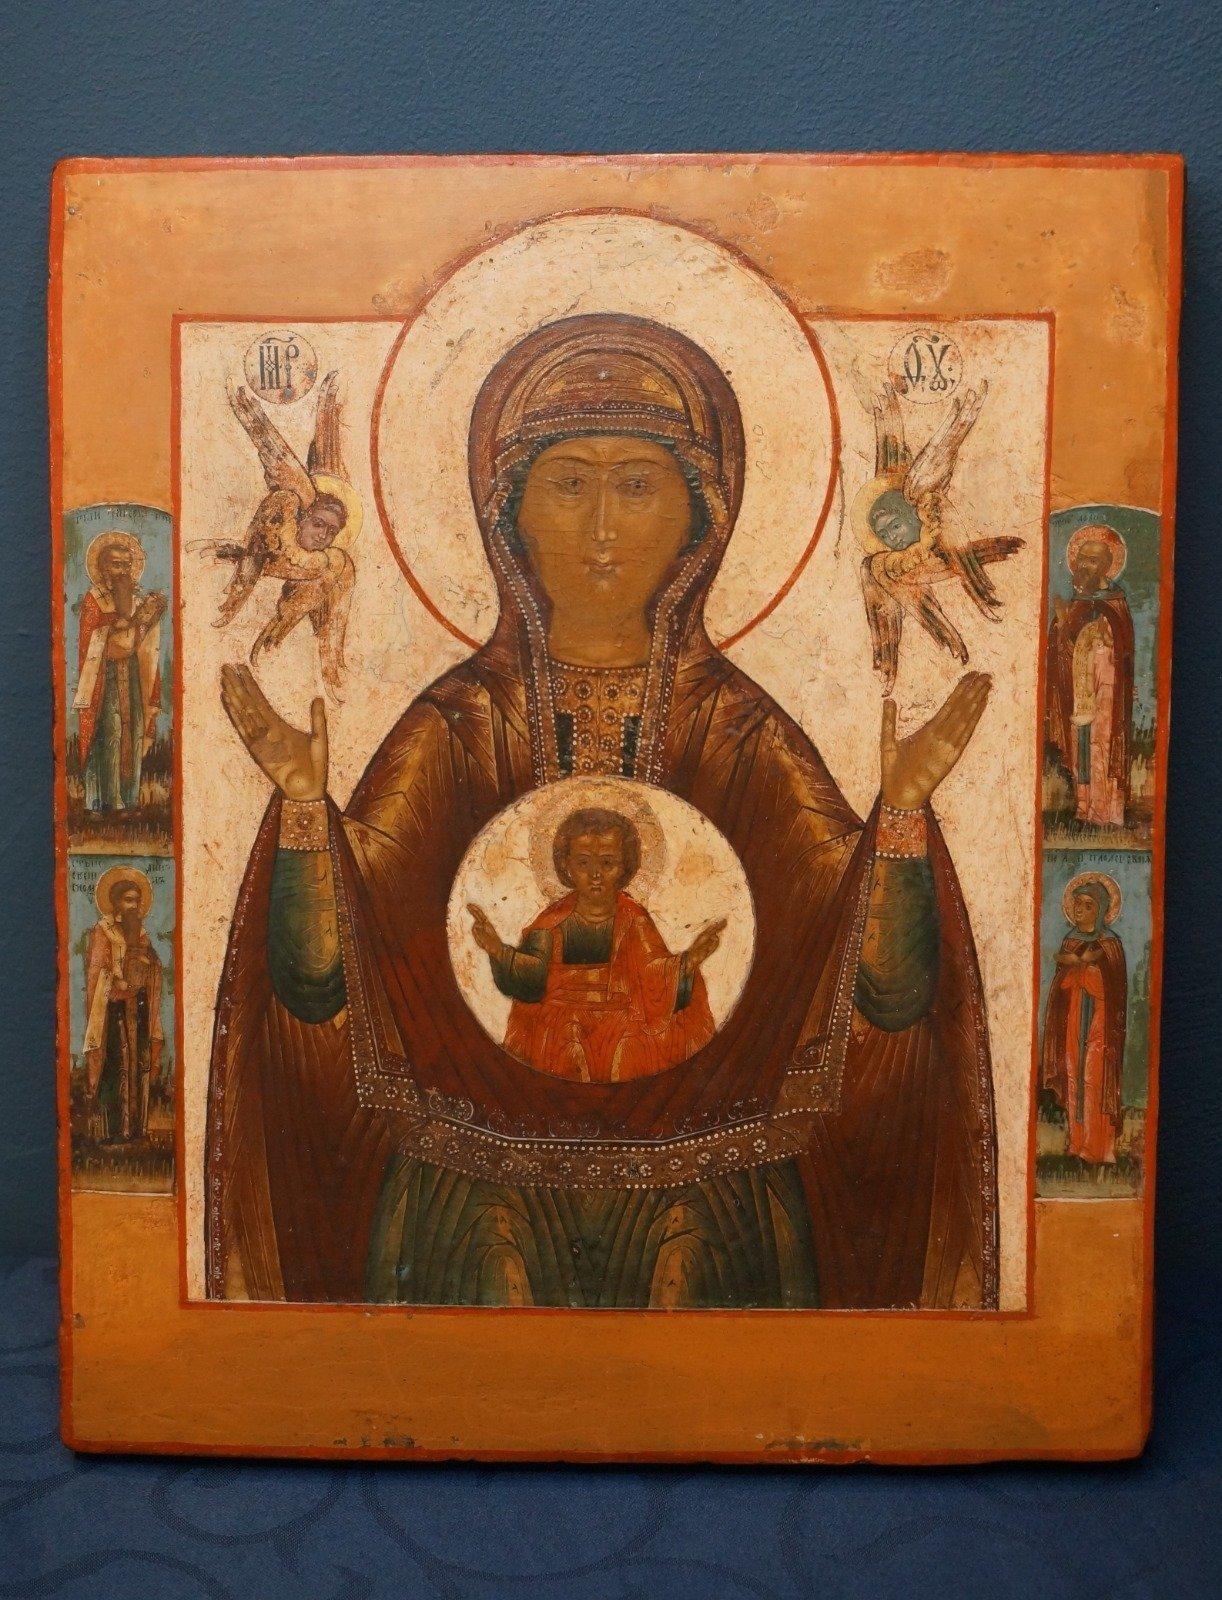 Meditative Central Russian icon depicting the Mother of God of the Sign, also titled the Znamenje of Novogrod. Typical for this centuries old iconography is that the Mother of God is looking frontal to the spectator and spreads her arms in the